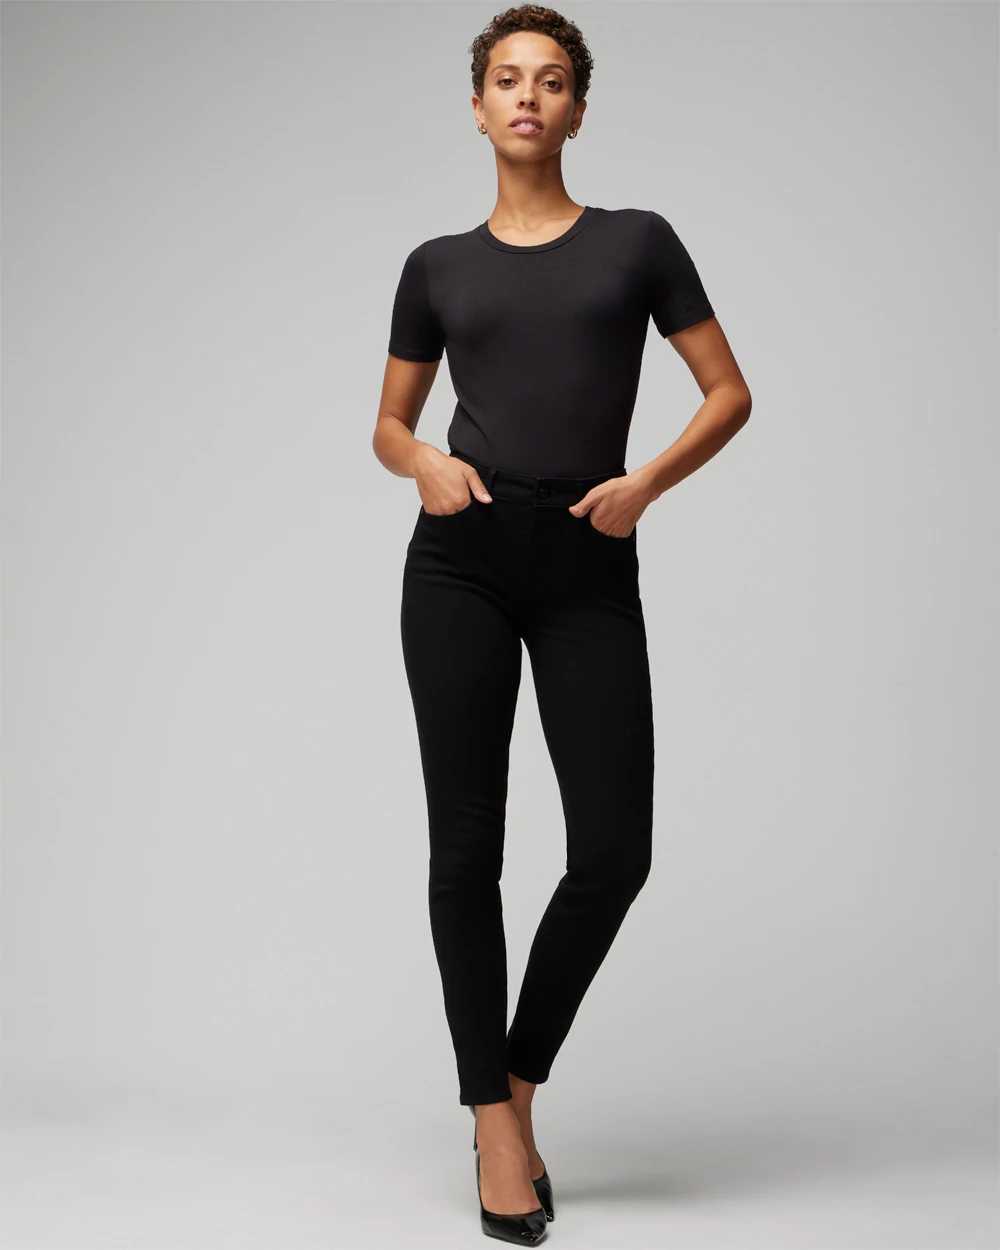 High-Rise Sculpt Black Skinny Jeans click to view larger image.